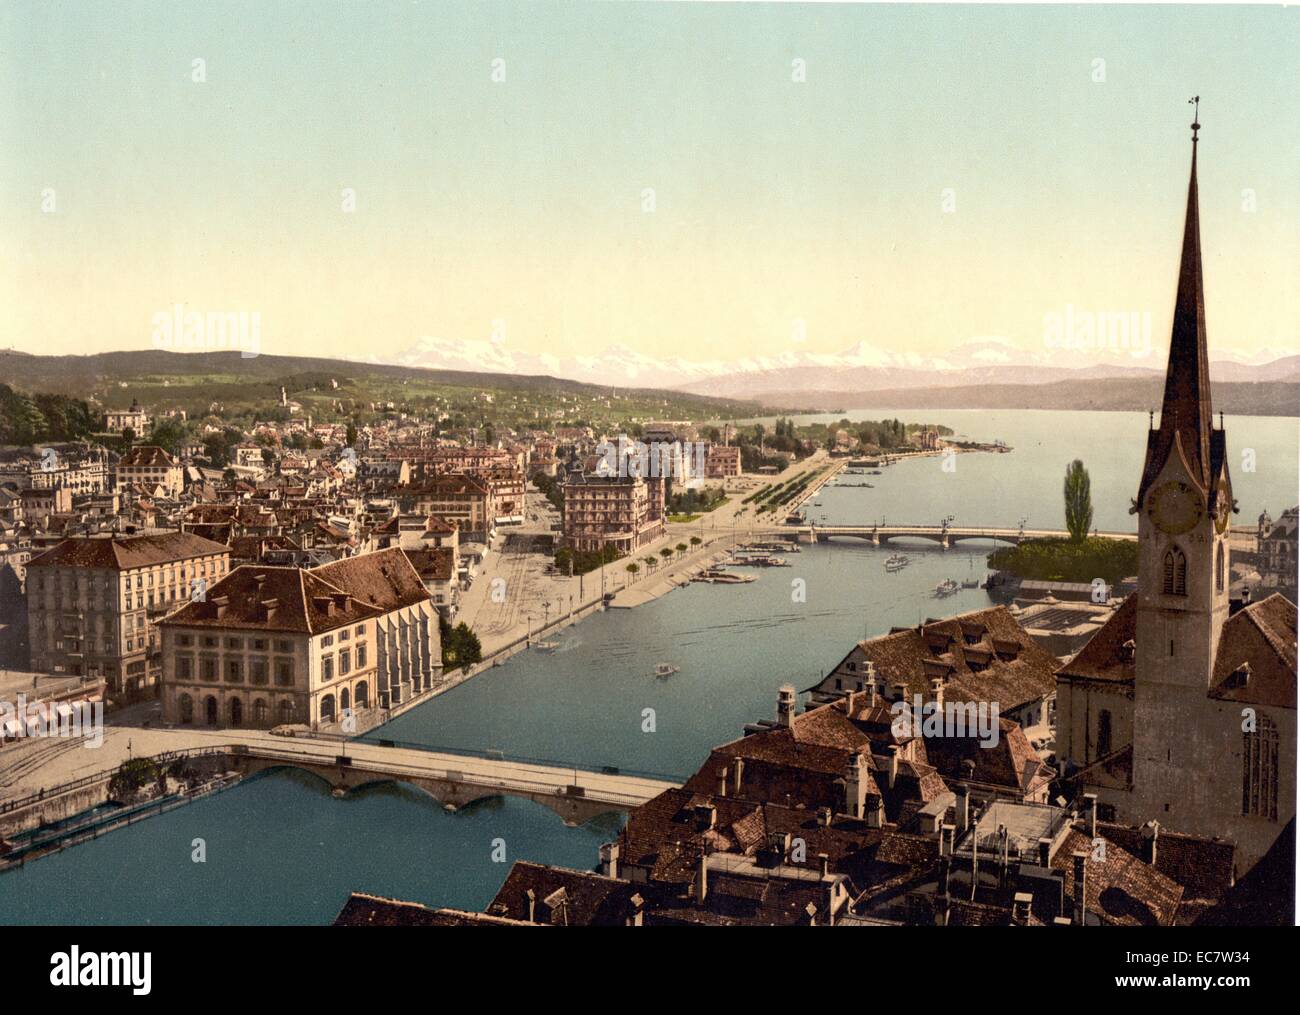 Colour river scene in Zurich, Switzerland. Shot between 1890 and 1900. The scene shows two bridges at the mouth of the river. Stock Photo